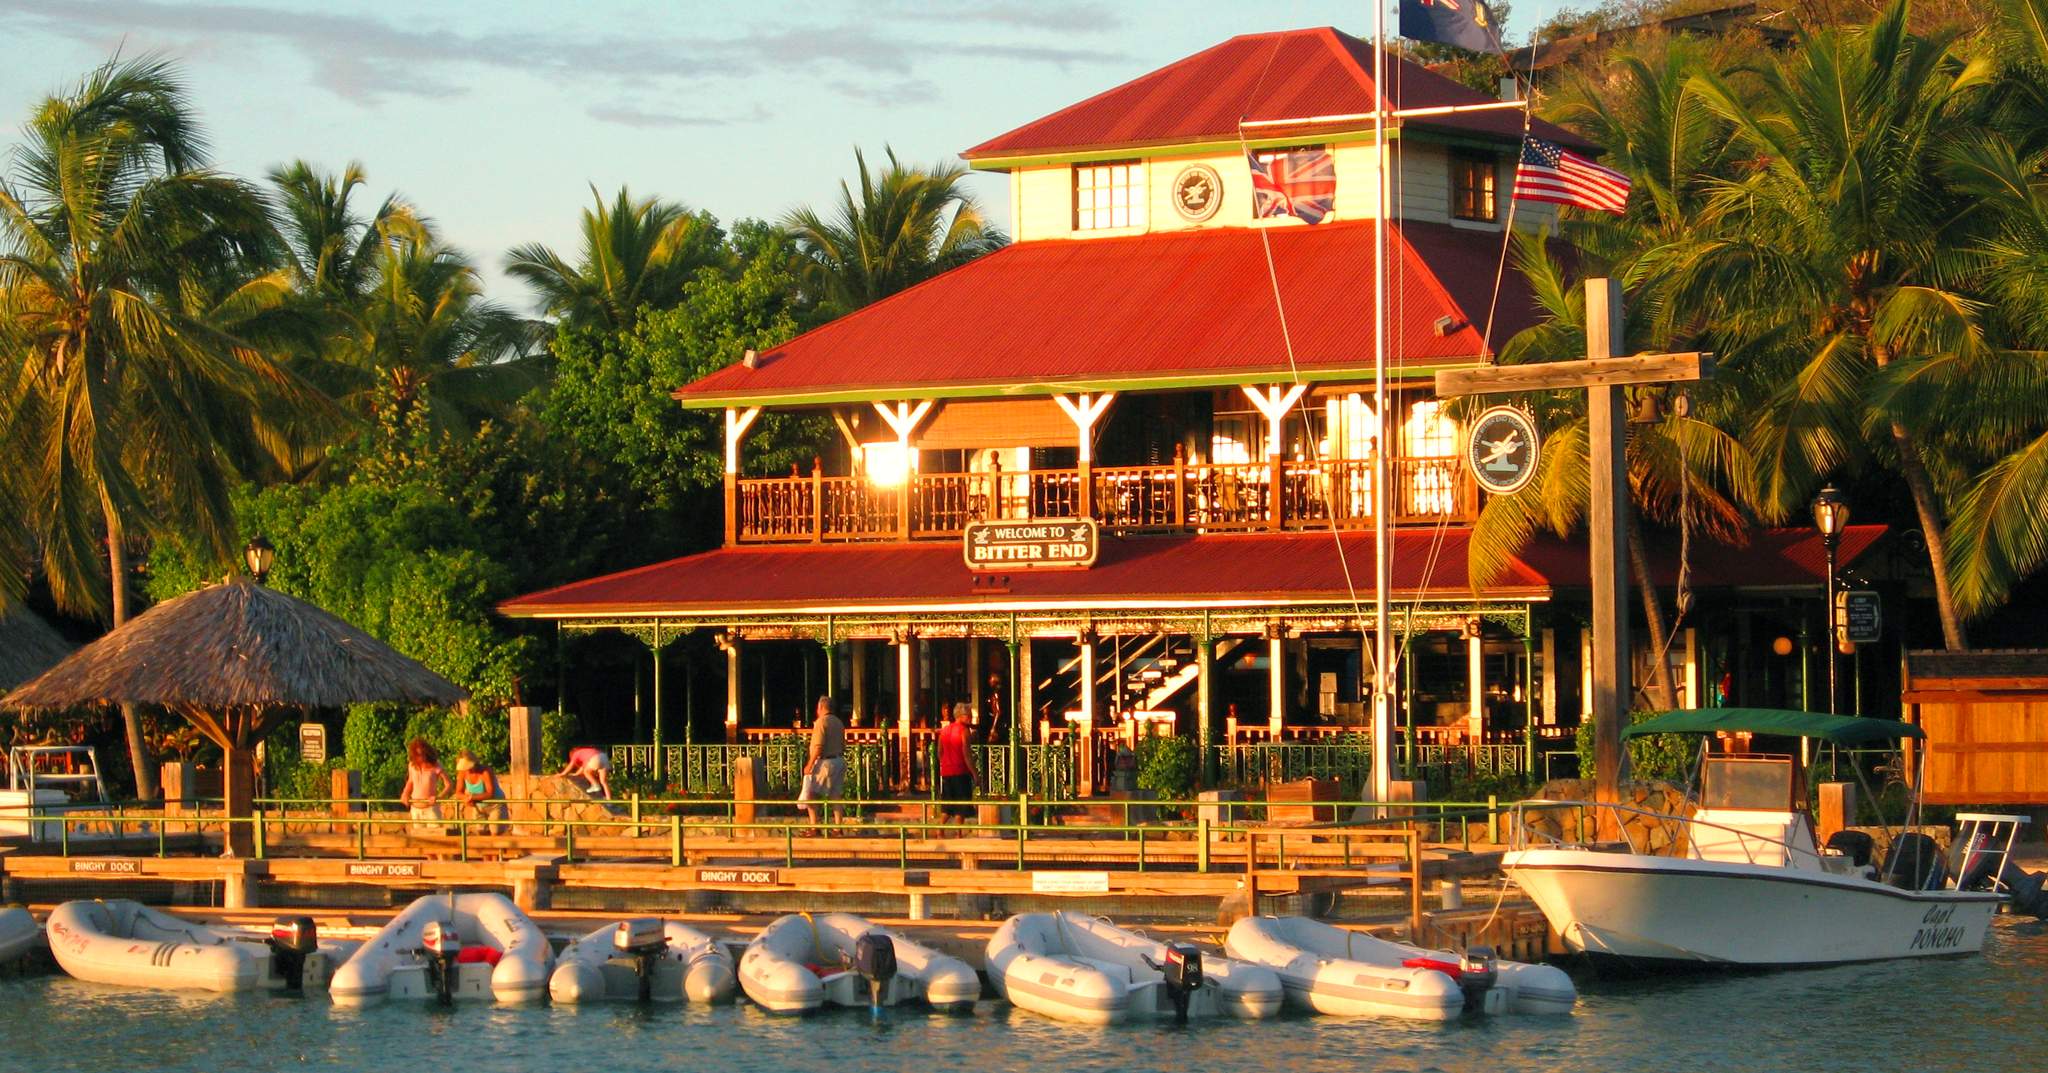 cost to stay at bitter end yacht club